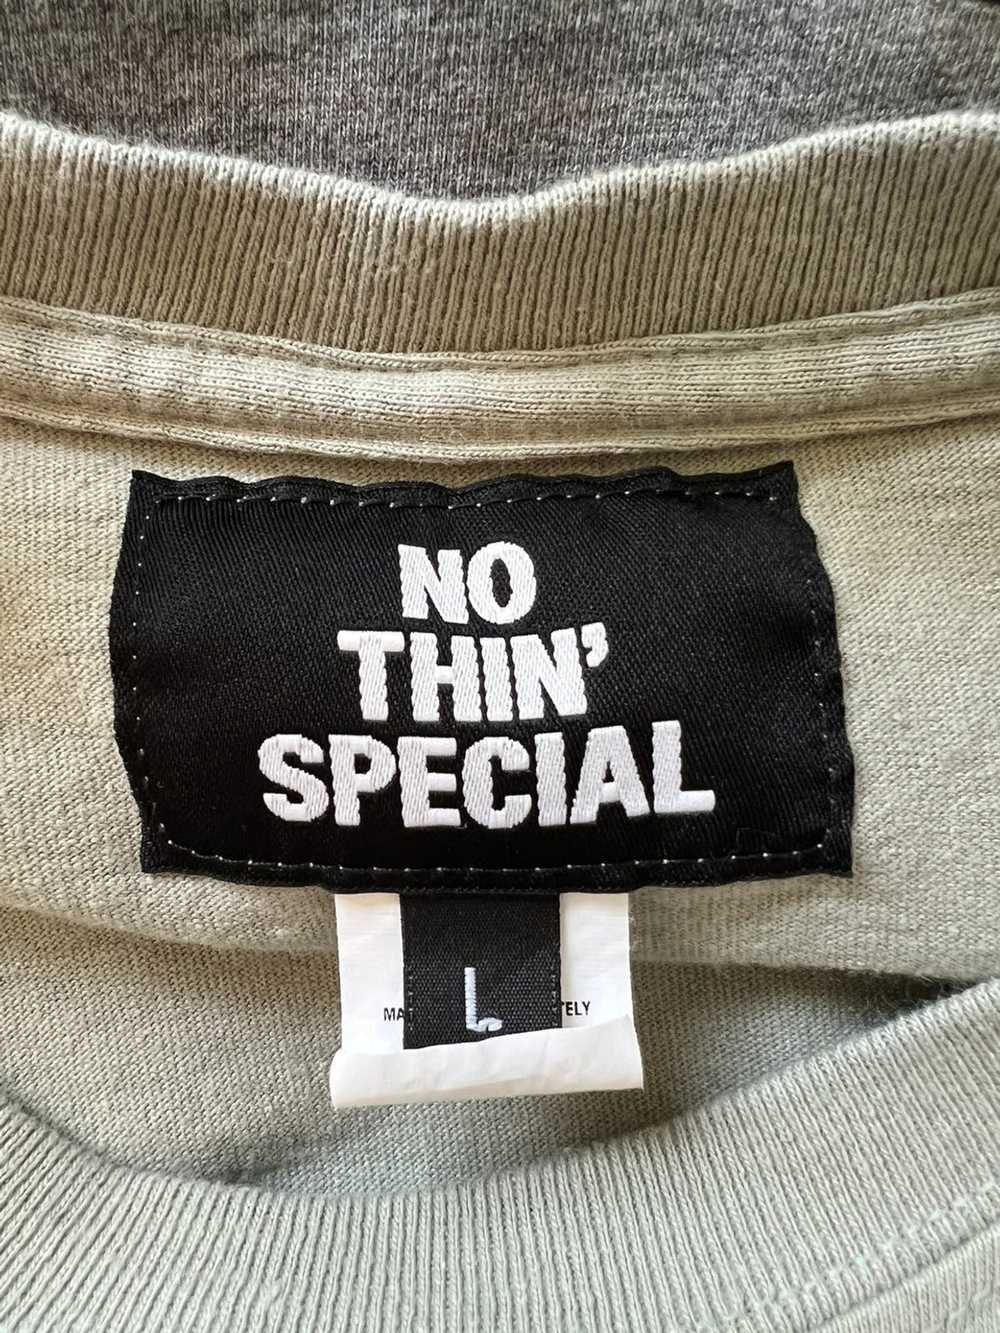 Nothin'Special Nothin’ Special Big Apple Tee - image 3